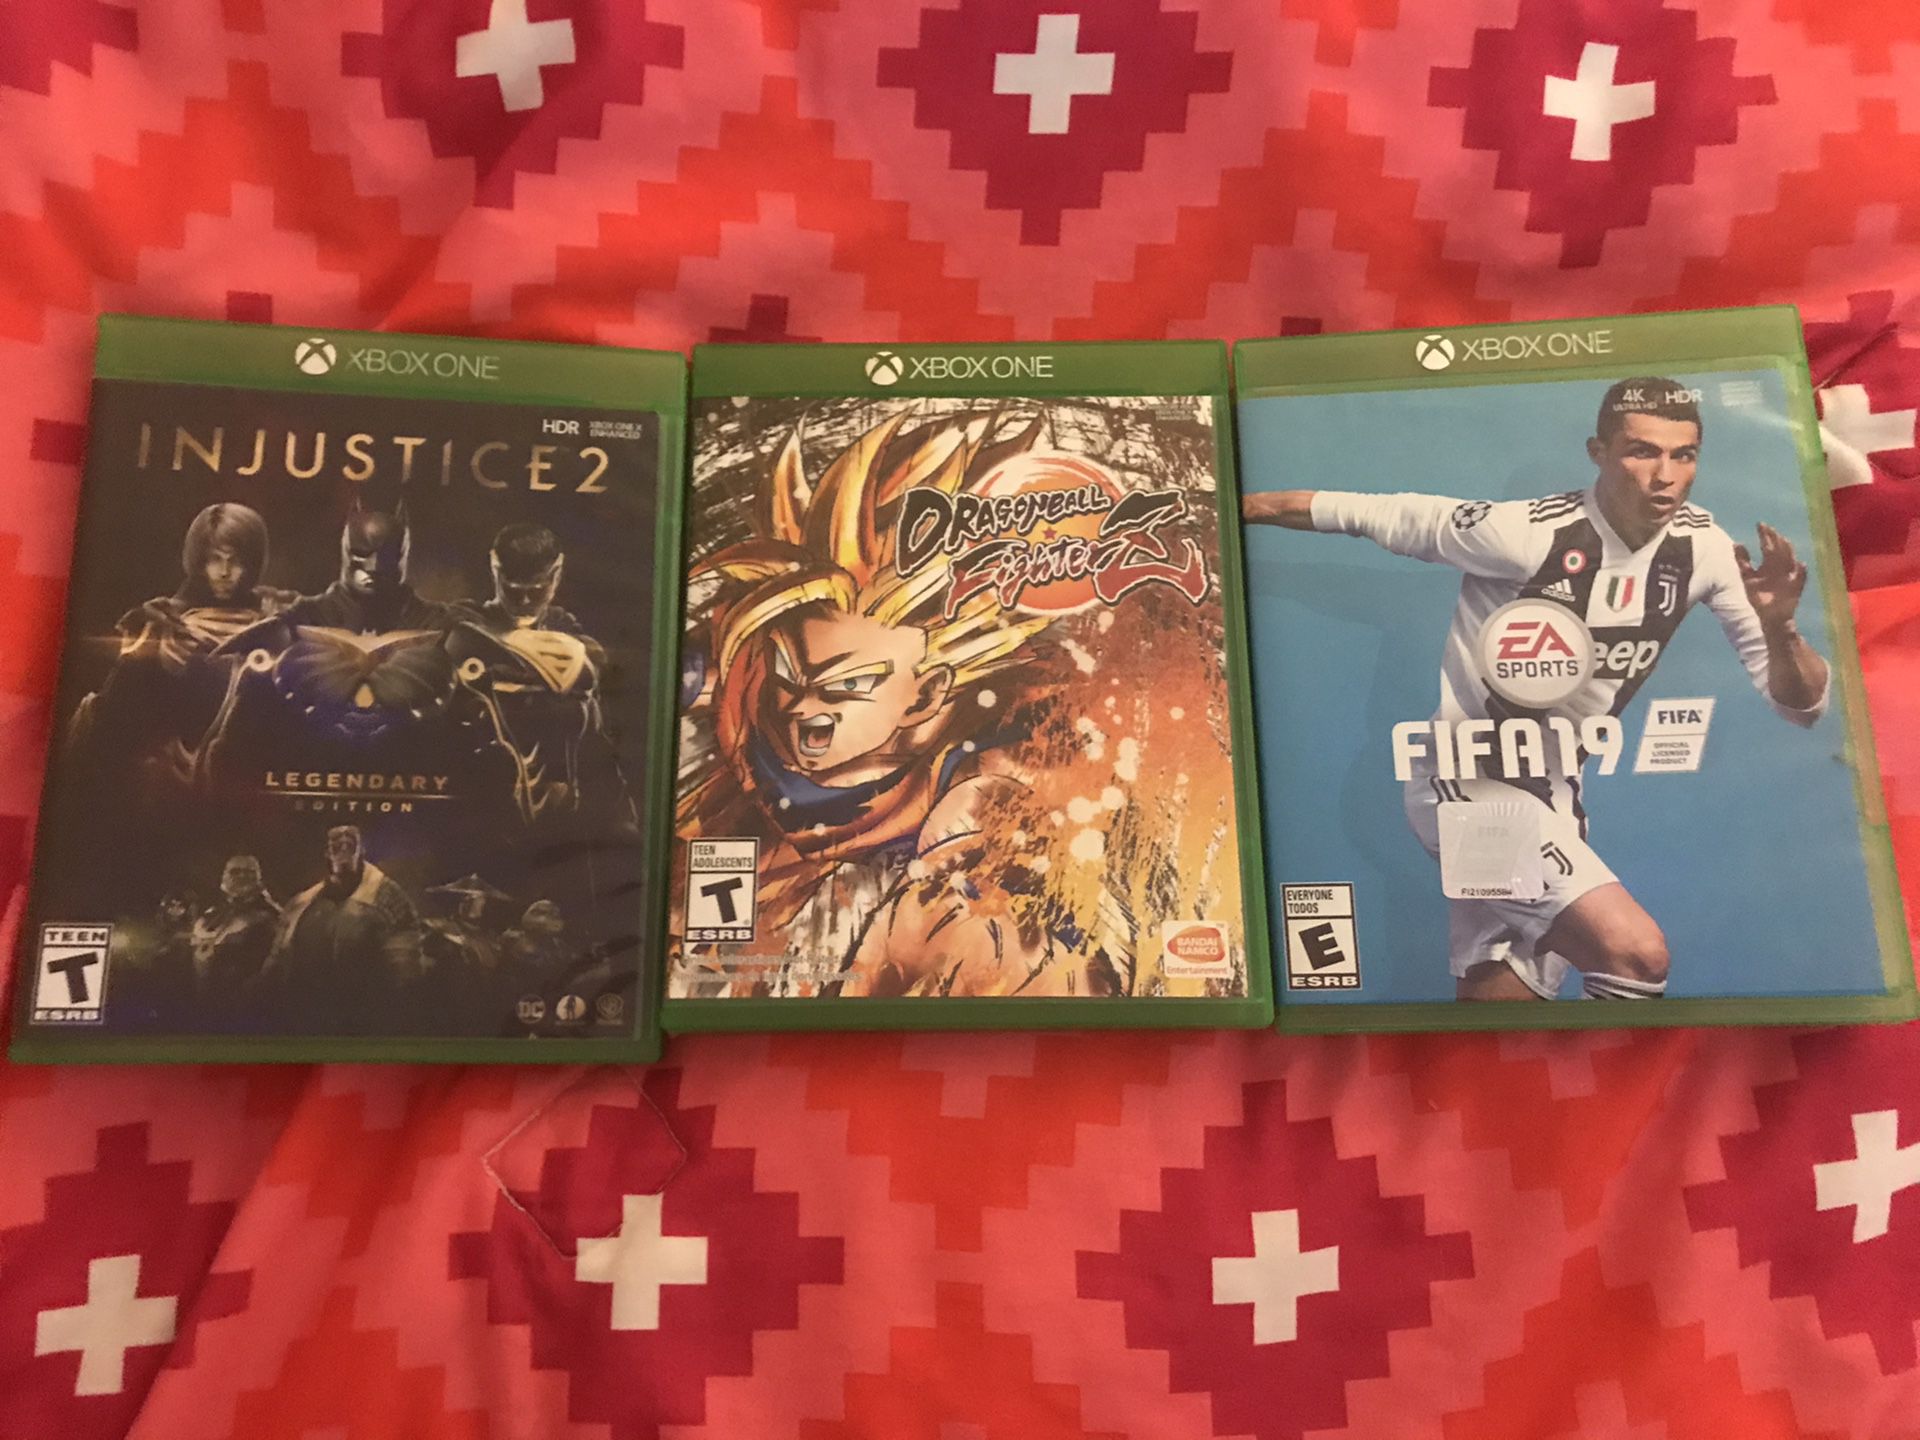 Injustice 2, Dragonball FighterZ, Fifa 19 Xbox One